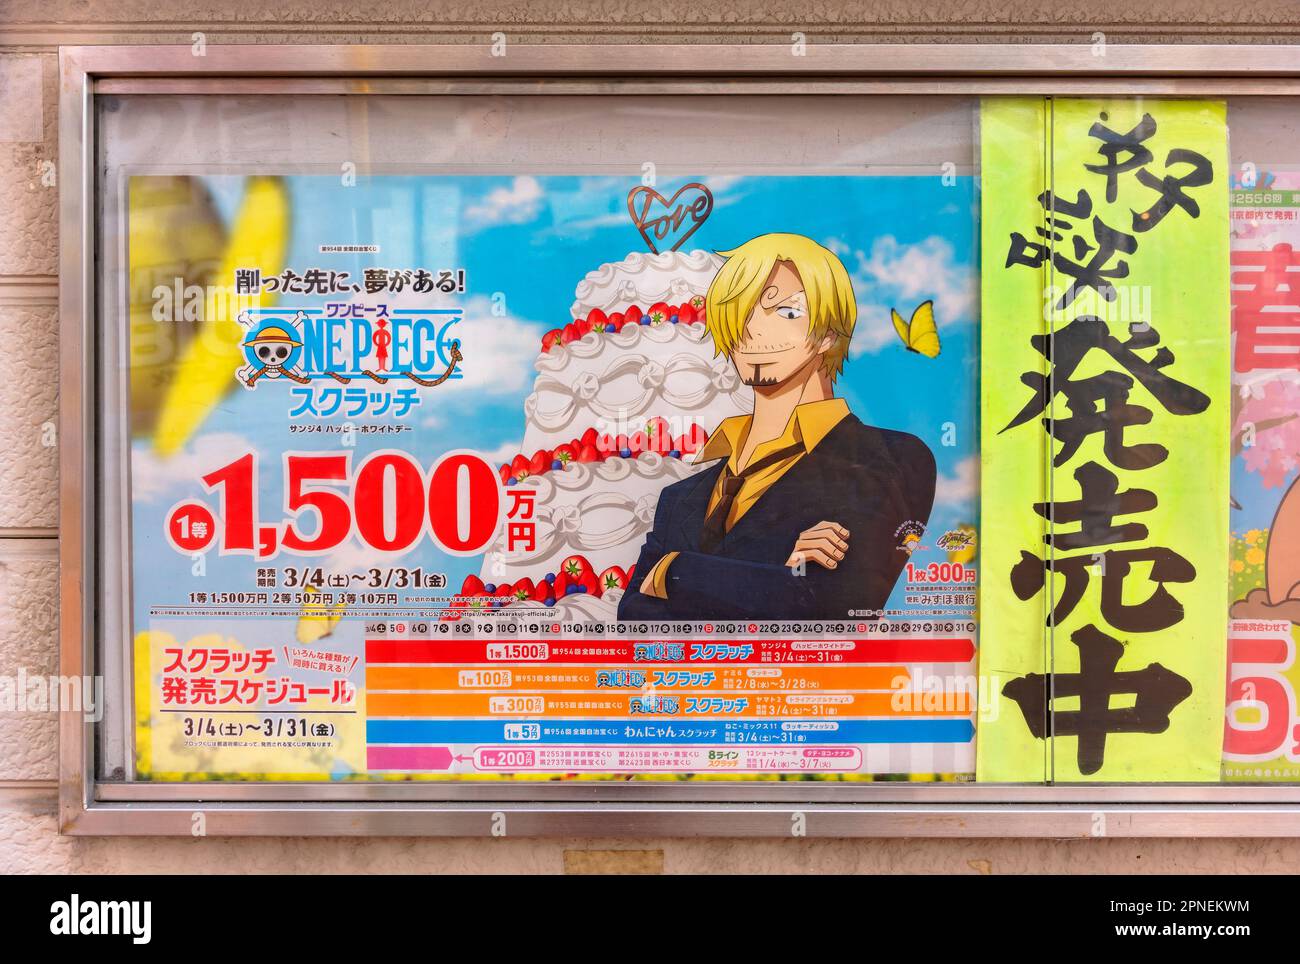 tokyo, japan - mar 29 2023: Japanese advertising poster of Sanji character from anime and manga One Piece for a Japan National Lottery scratch-off tic Stock Photo